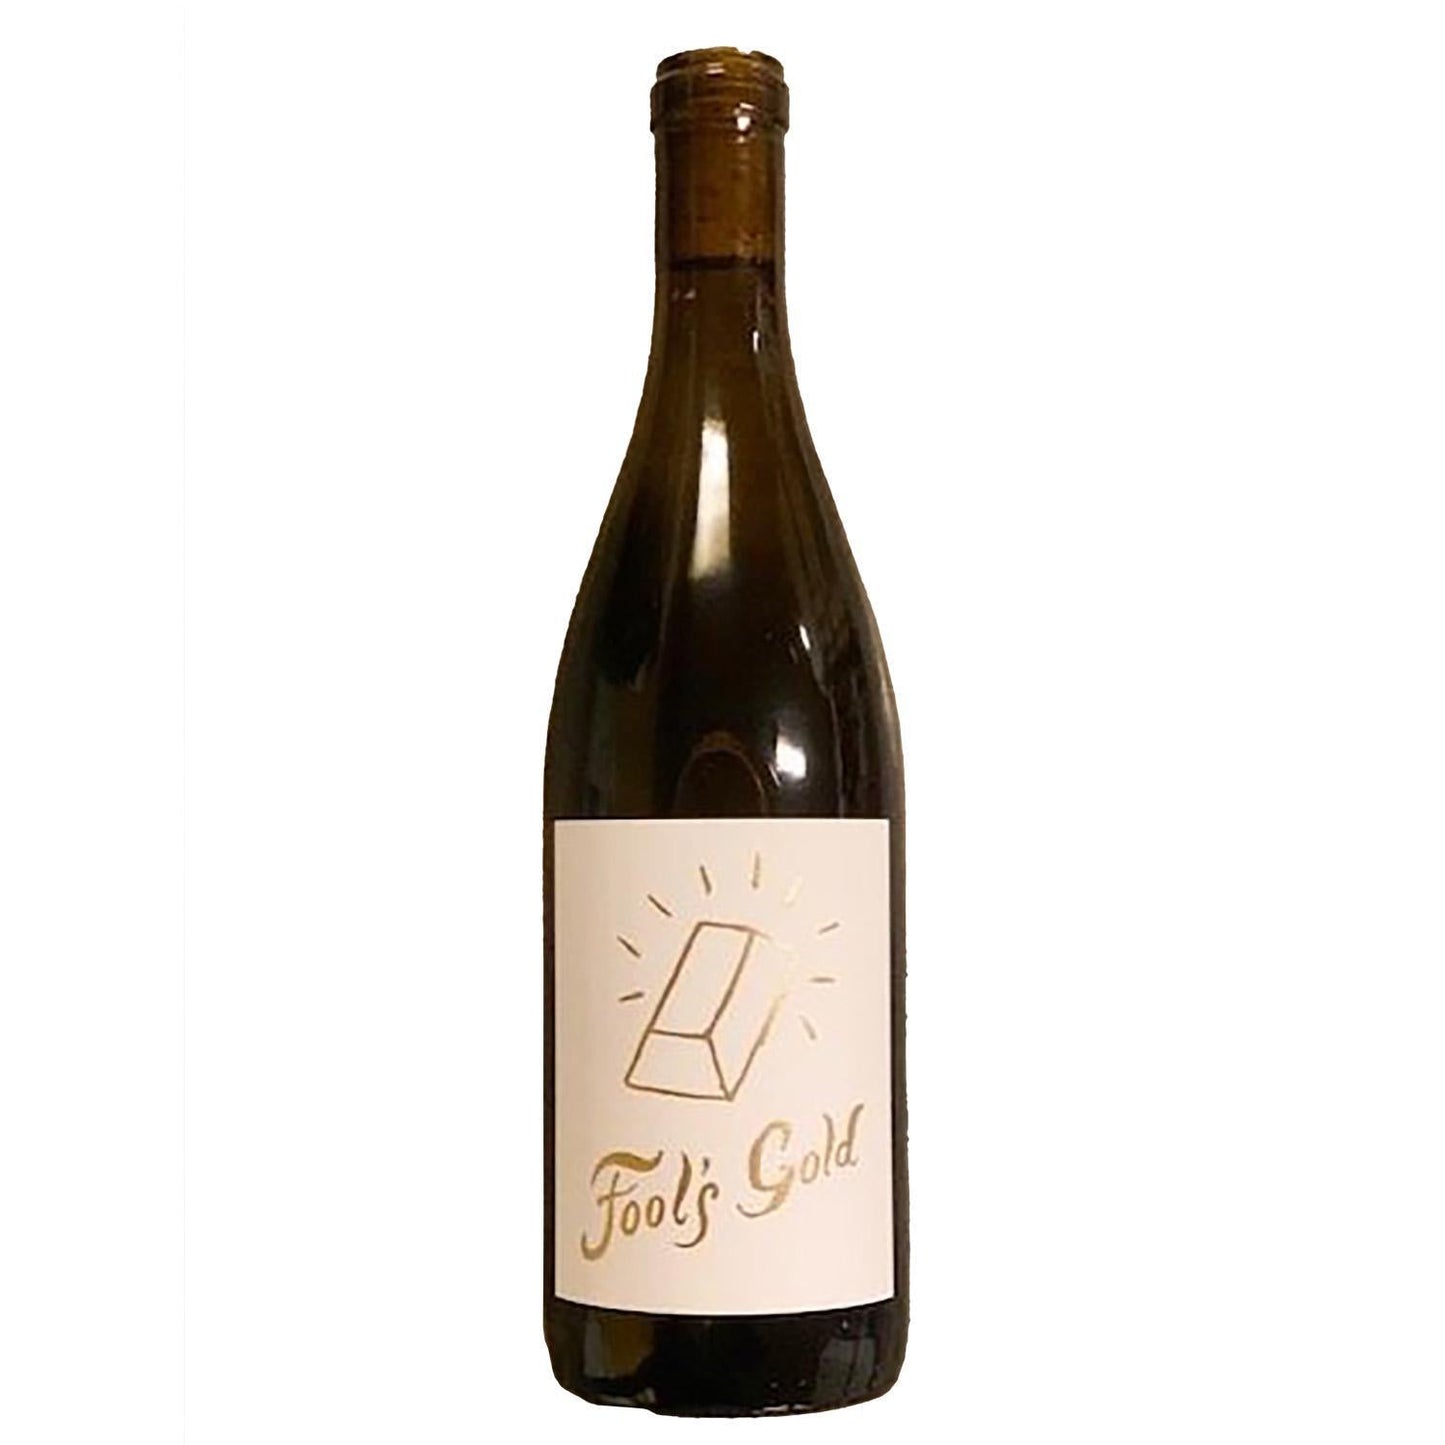 Bow & Arrow Fool's Gold Chard/SB - The Epicurean Trader